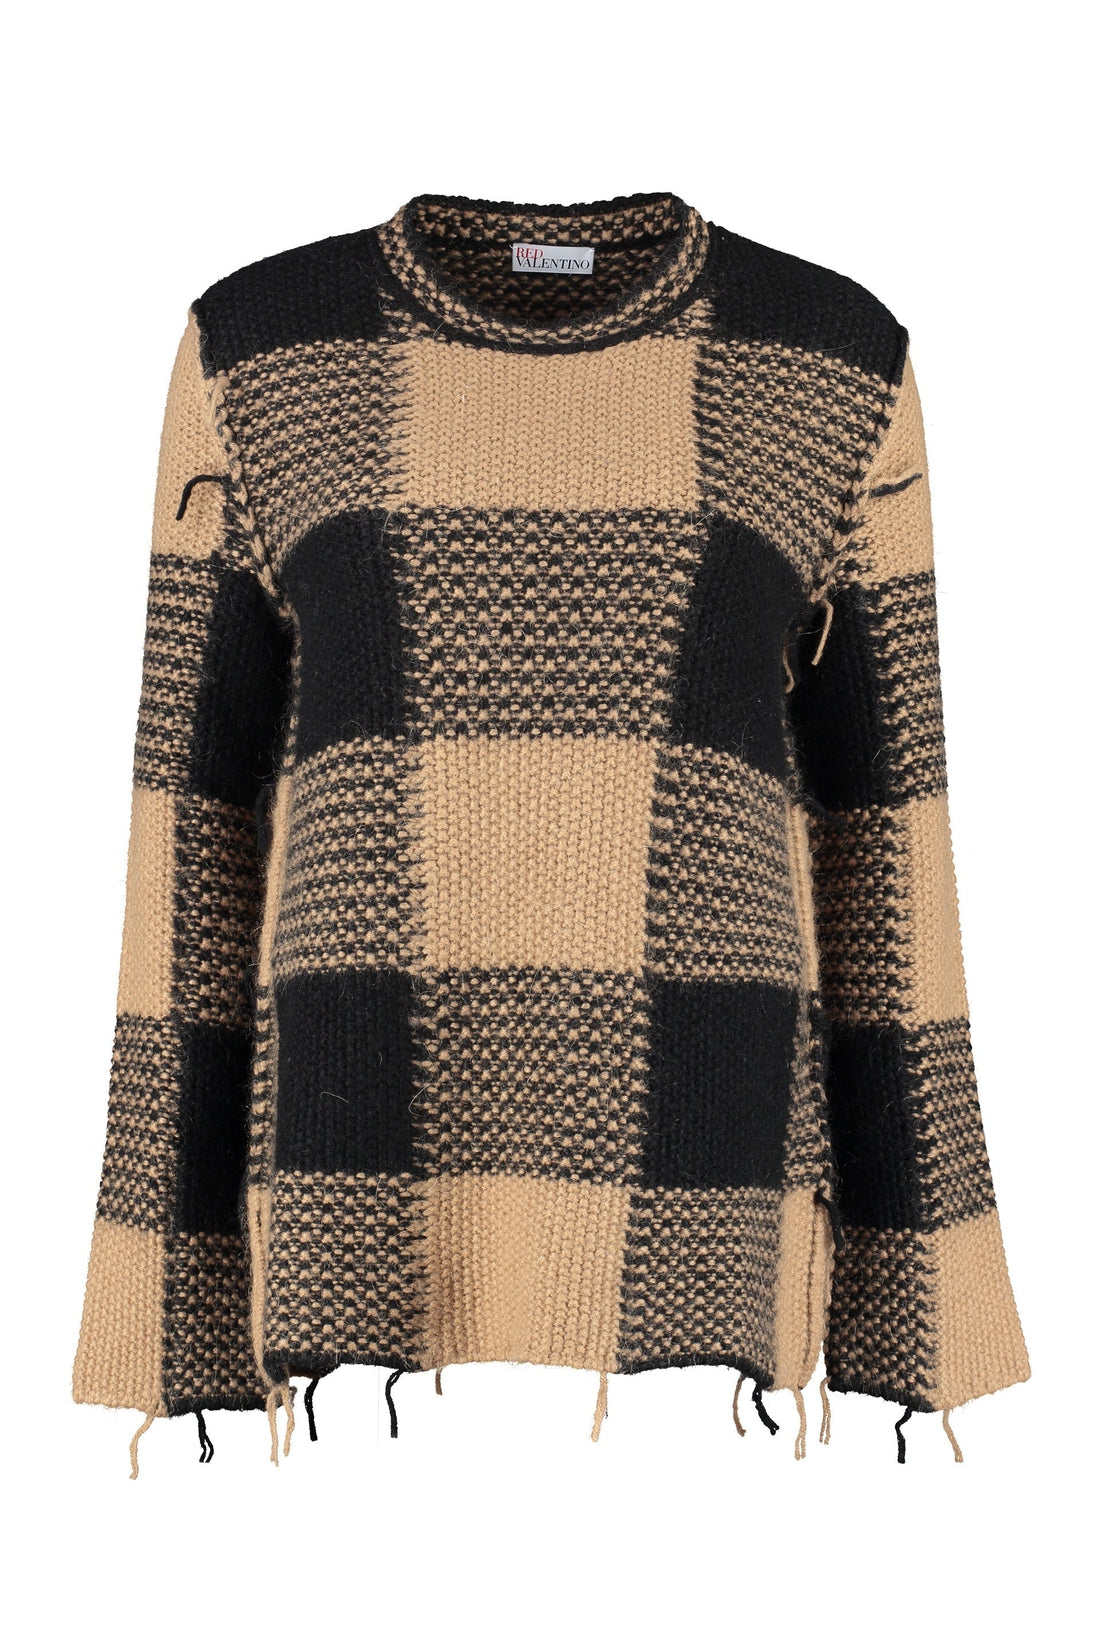 RED VALENTINO-OUTLET-SALE-Long sleeve crew-neck sweater-ARCHIVIST